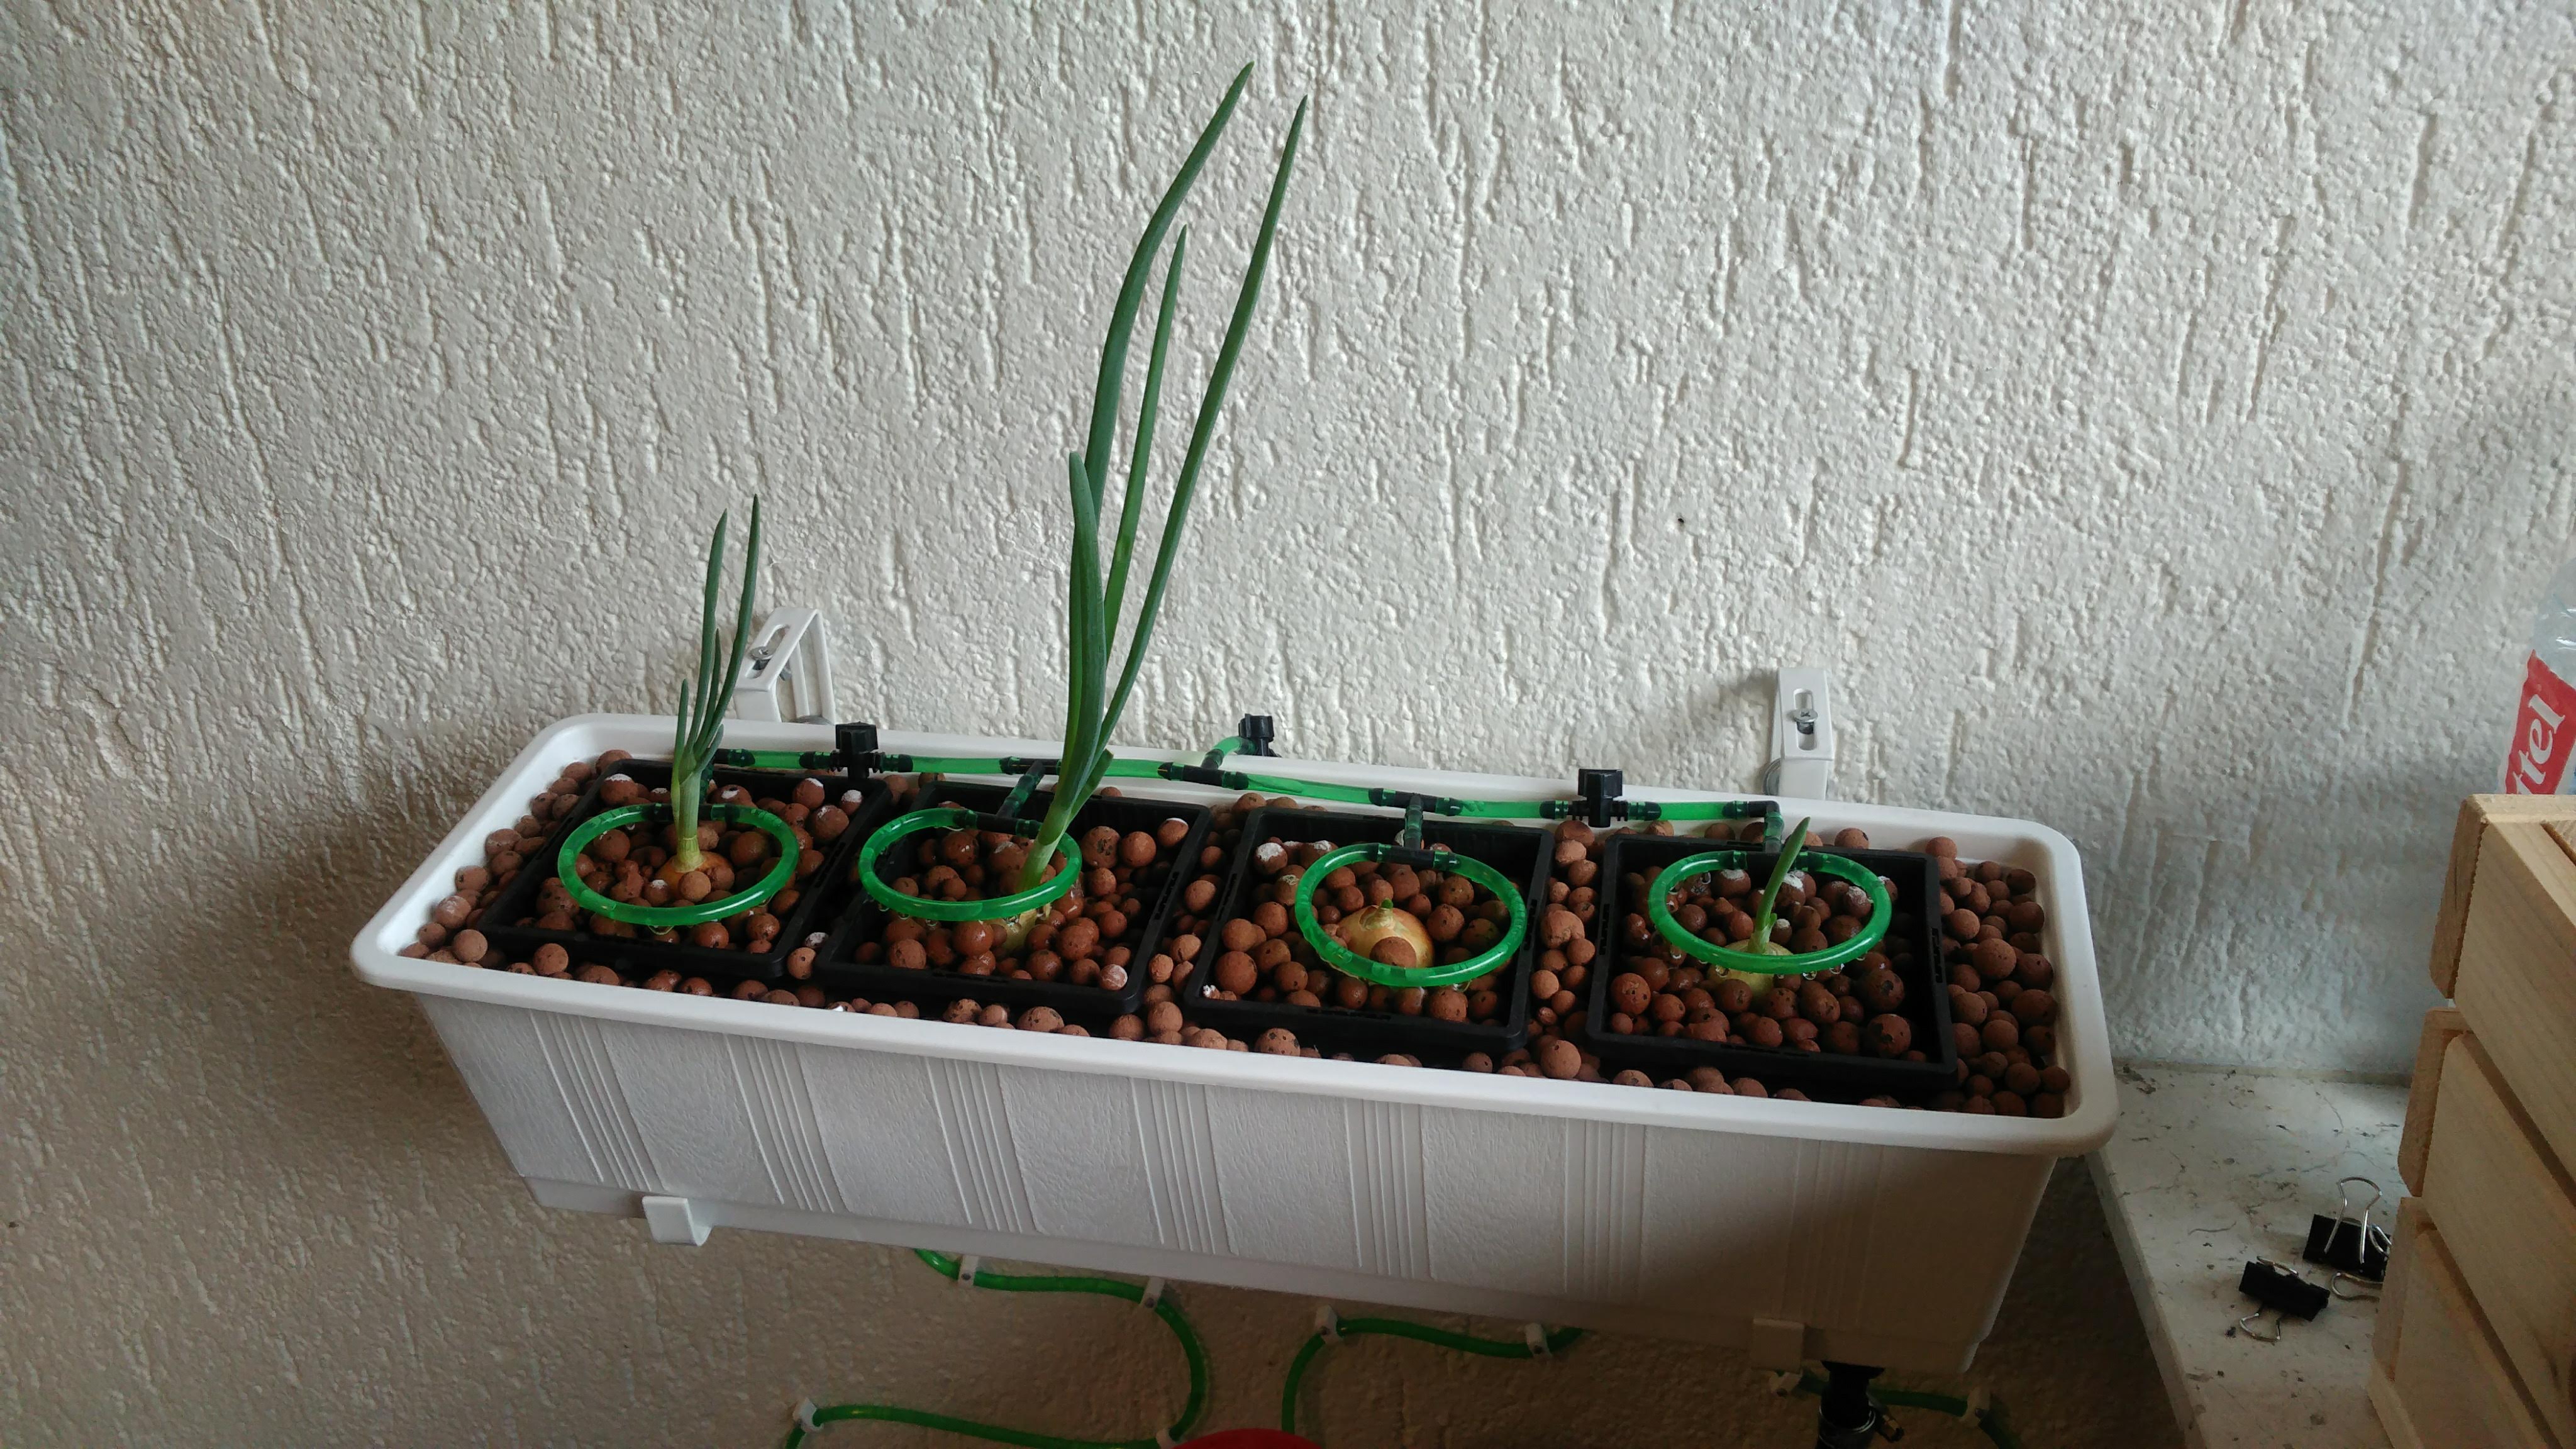 Growing onions in hydroponics